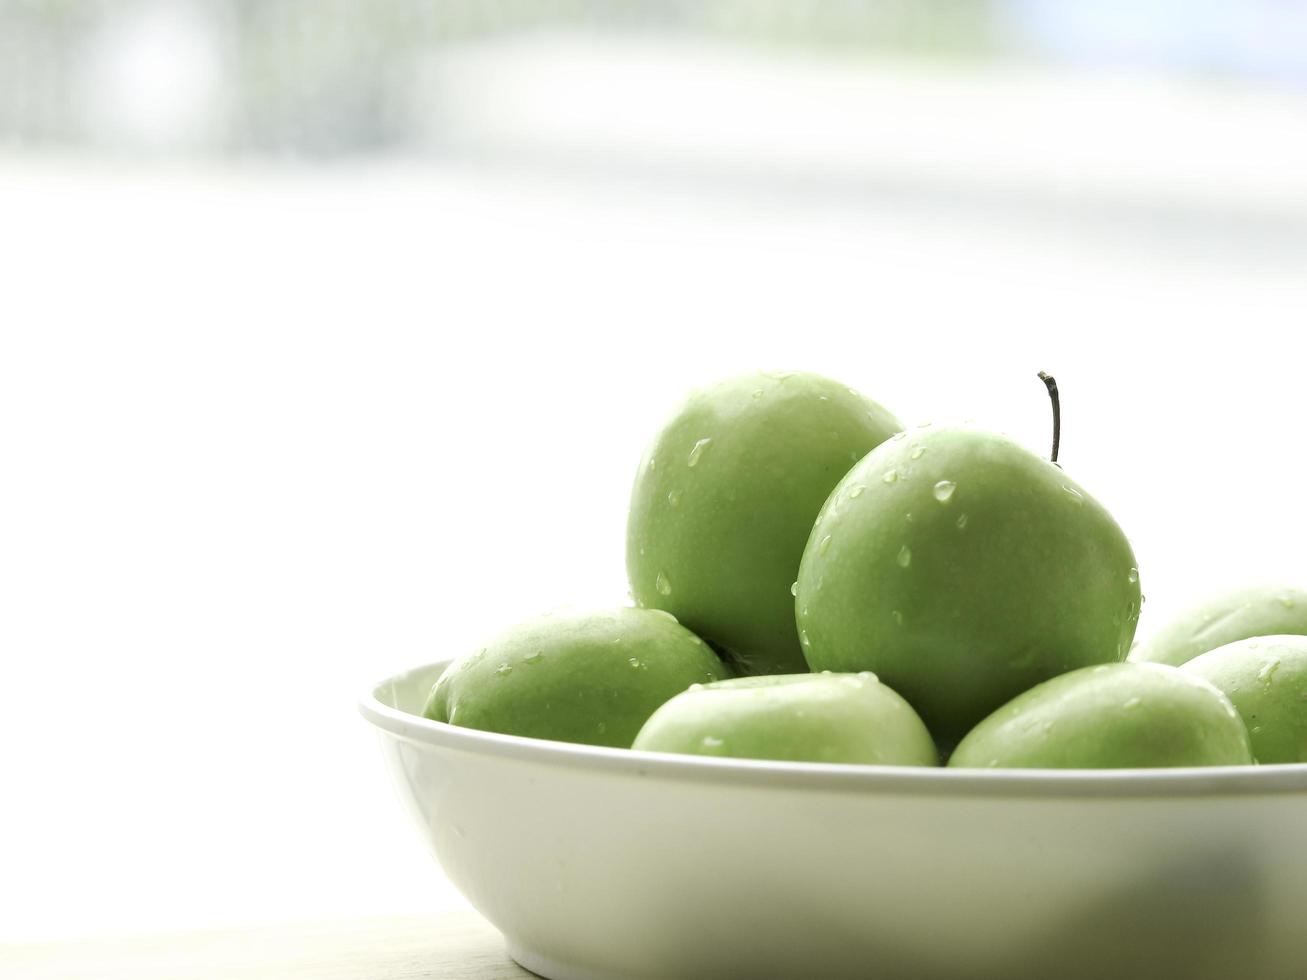 Ripe green apple raw fruit in white bowl on wooden table, healthy organic fresh produce photo